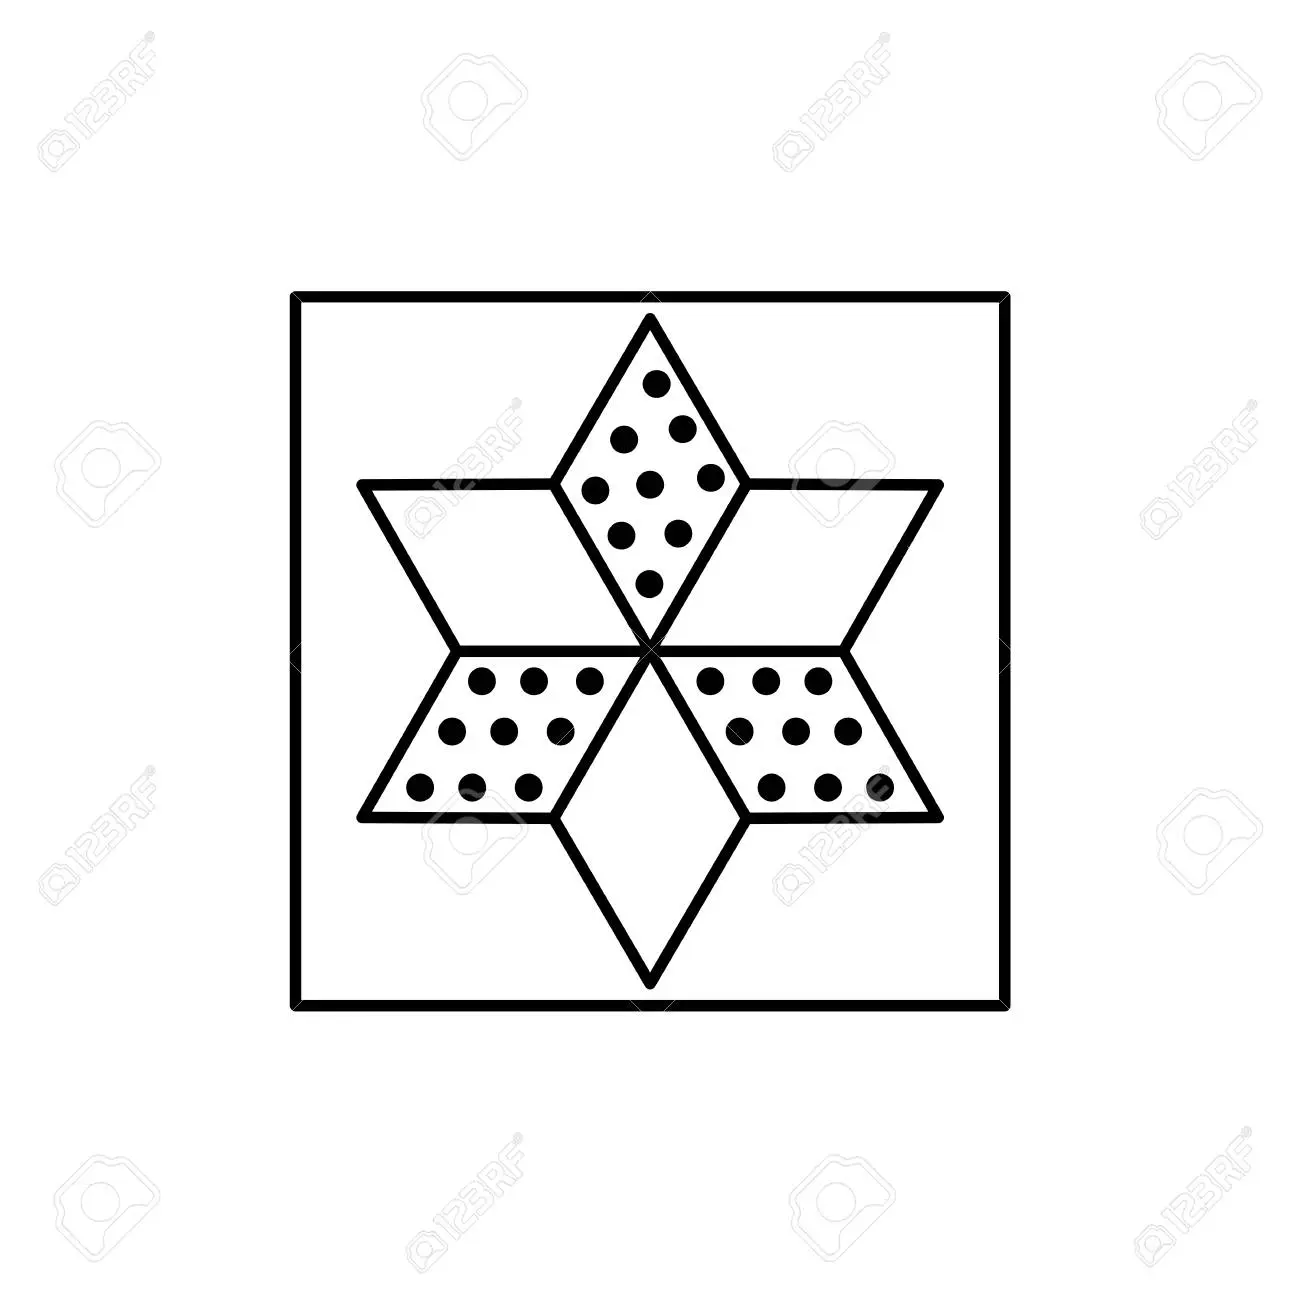 108095257-black-white-vector-illustration-of-star-quilt-pattern-line-icon-of-quilting-patchwork-geometric-desi